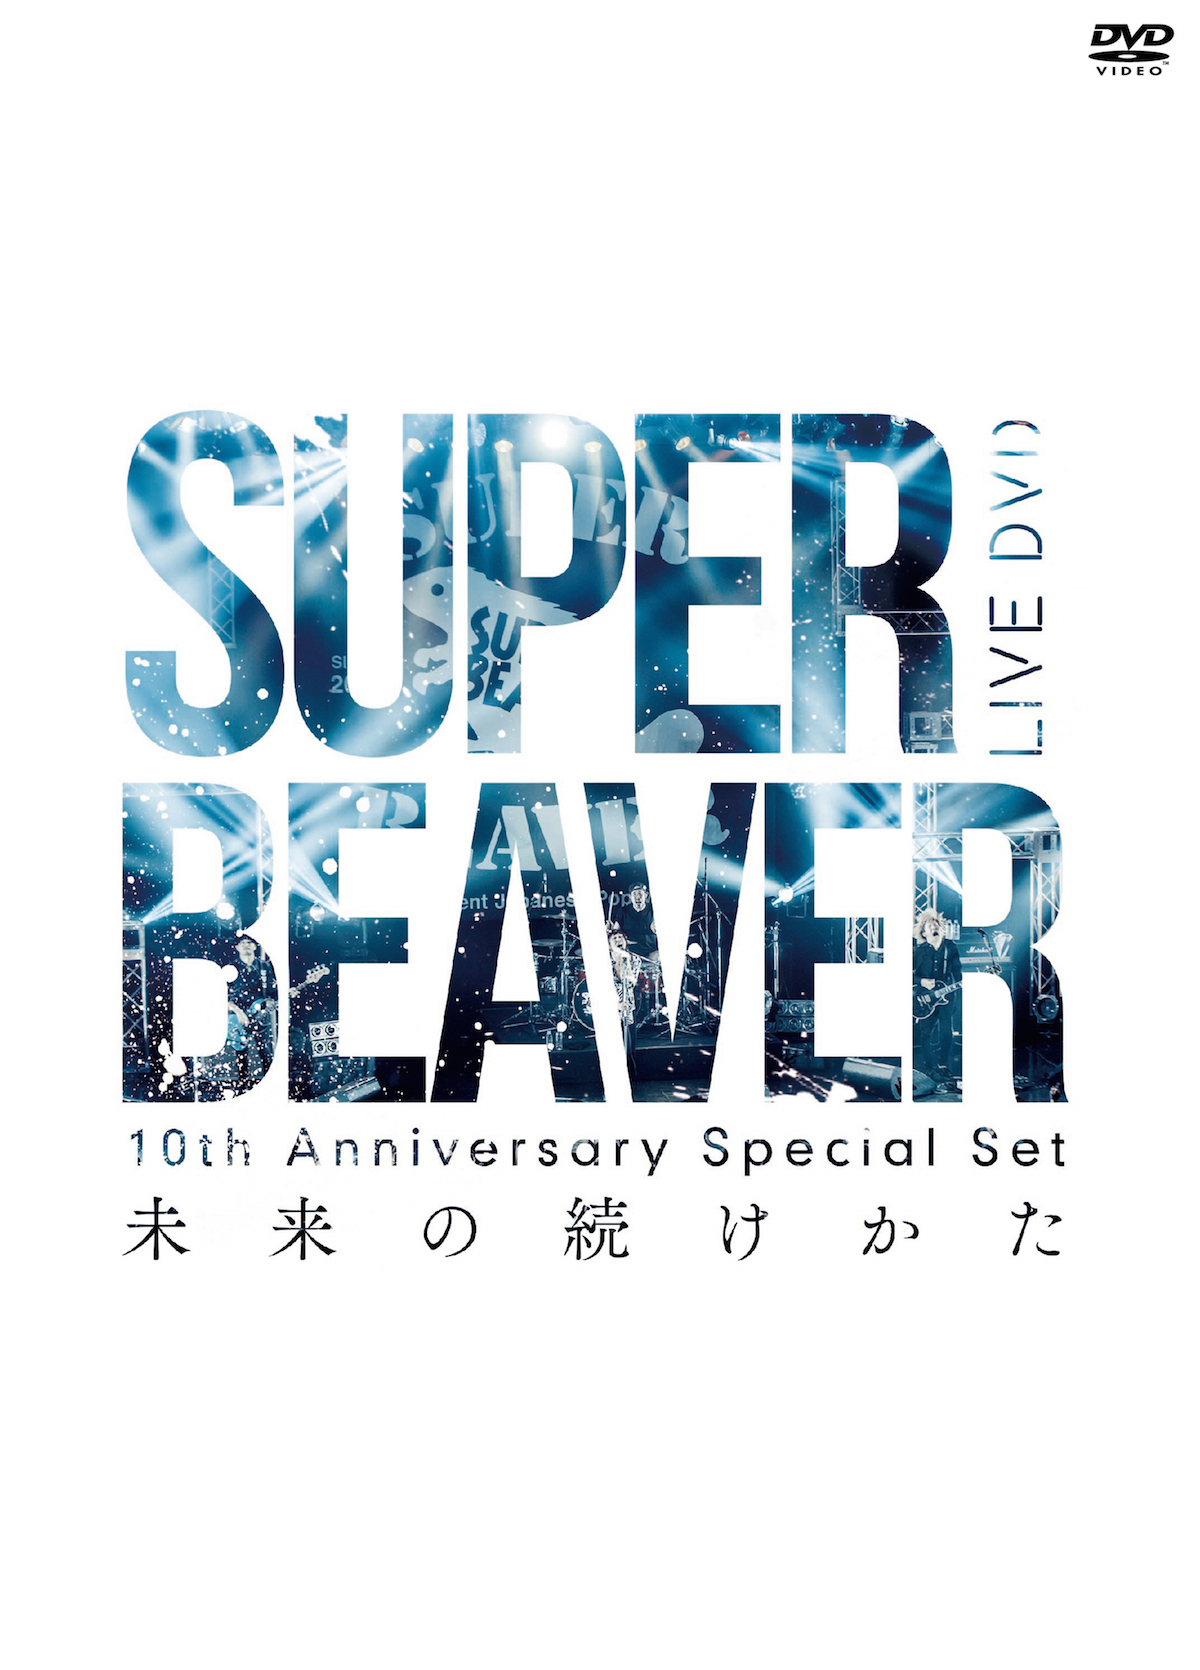 SUPER BEAVER 10th Anniversary Special Set「未来の続けかた」